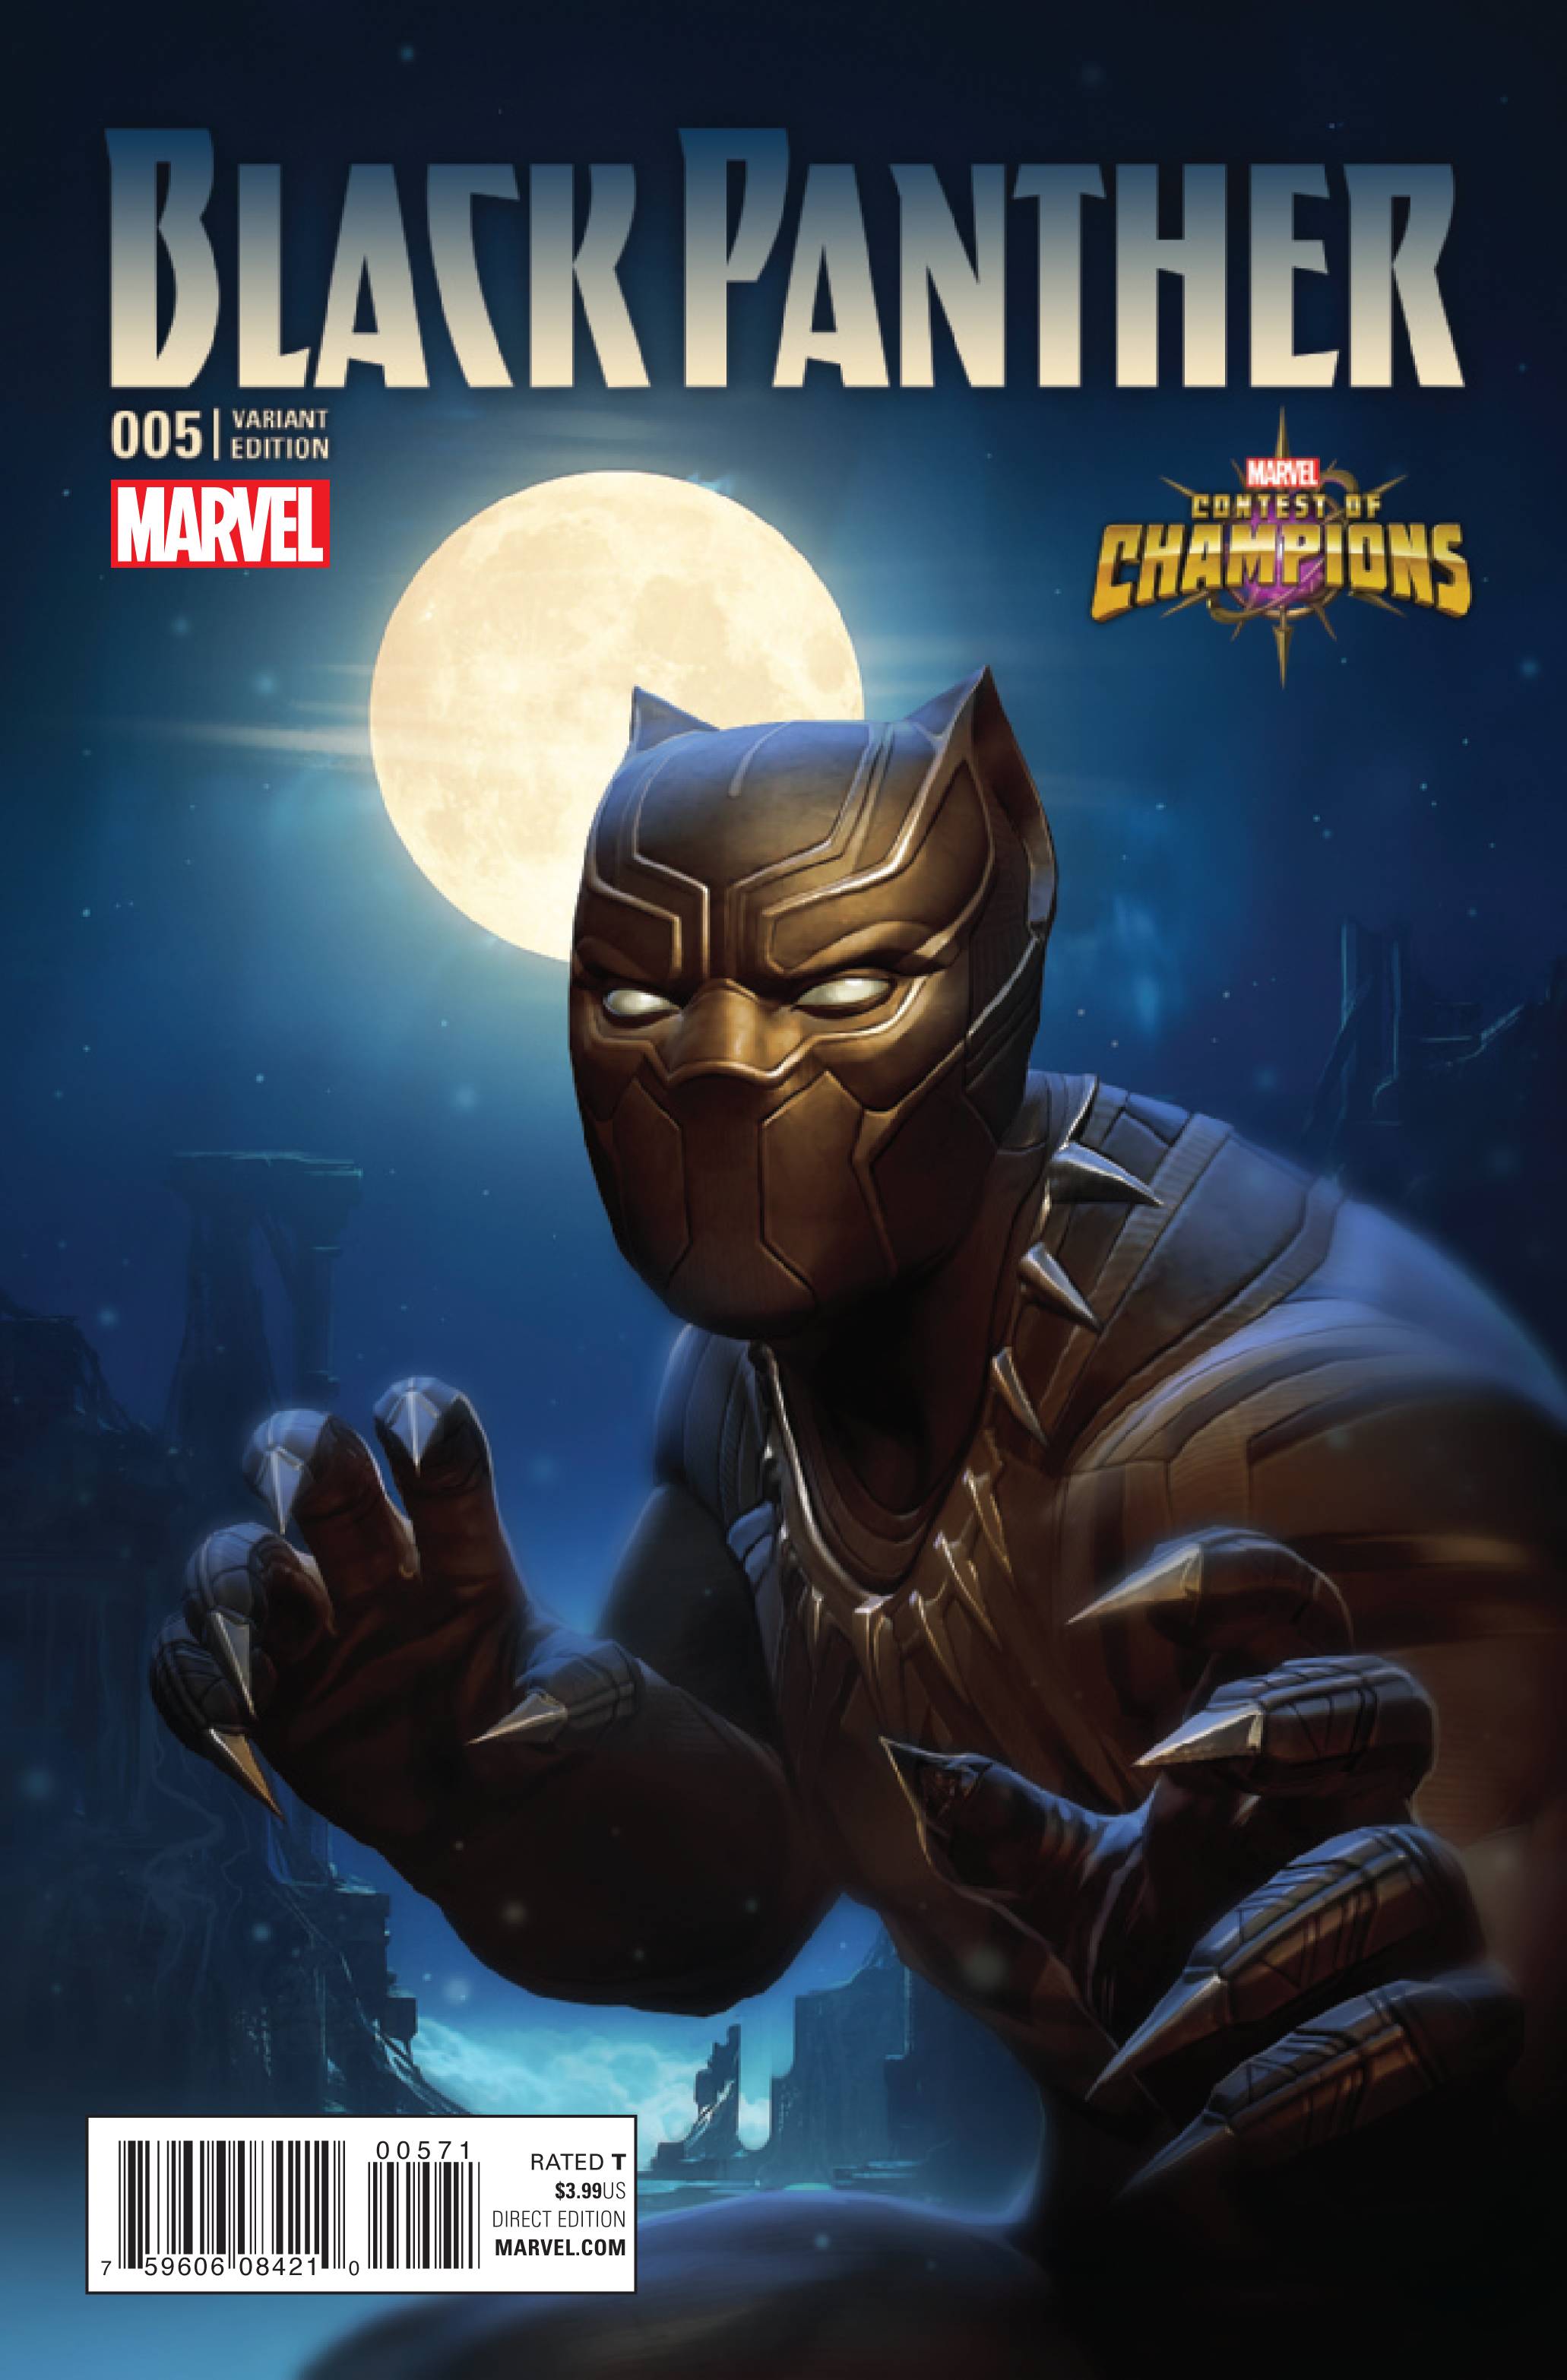 Black Panther #5 Kabam Contest of Champions Game Variant (2016)